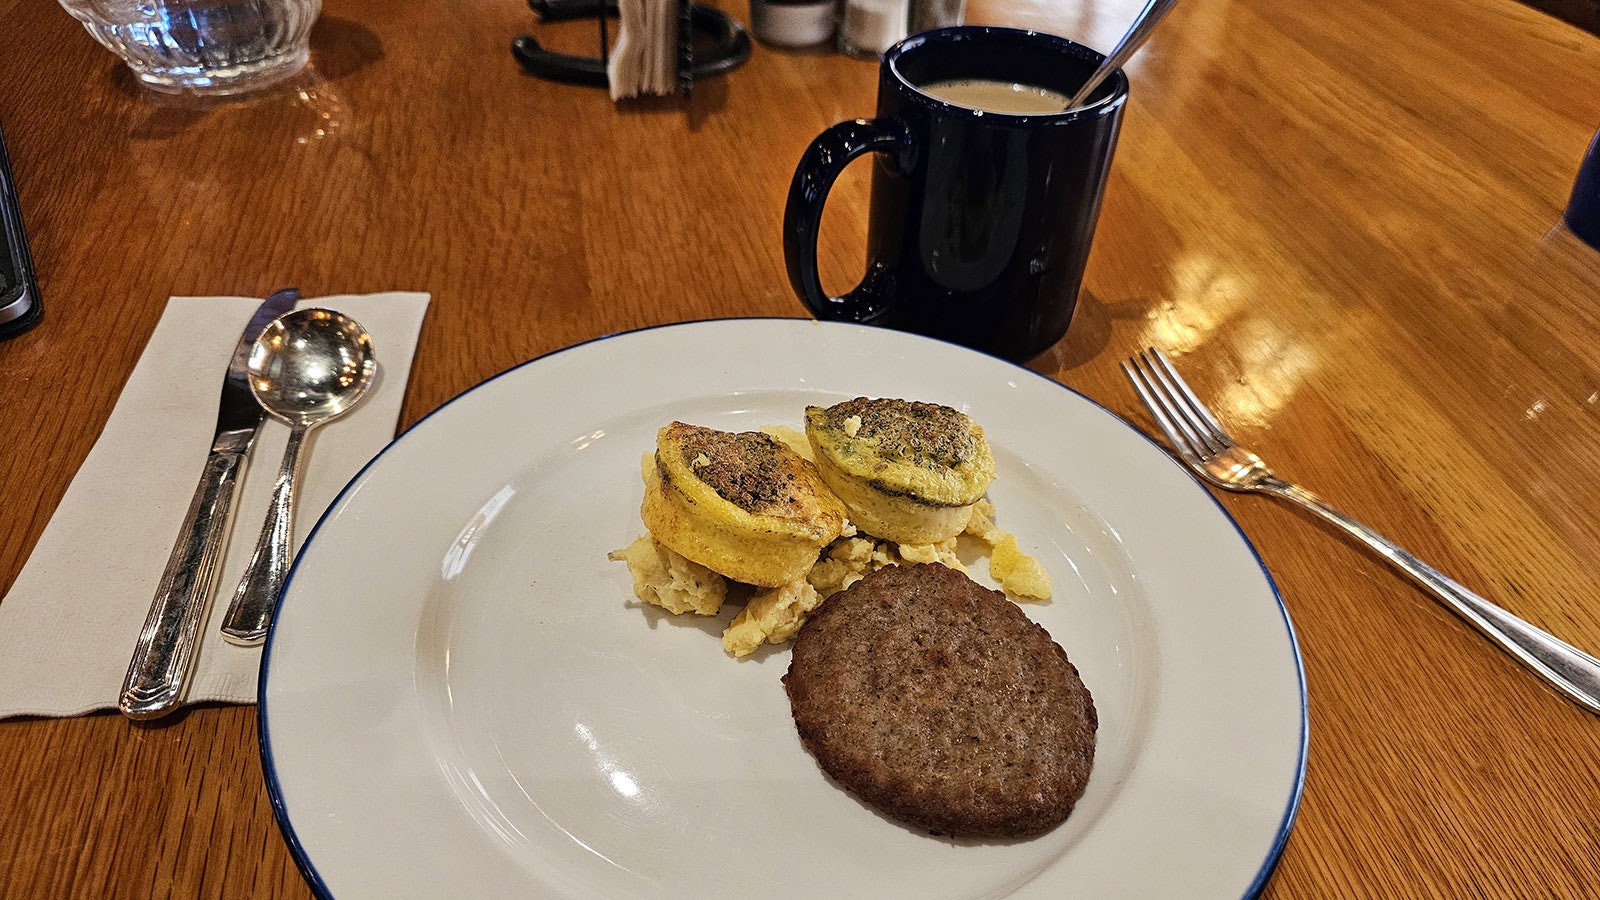 Breakfast buffet has all kinds of choices. Here, deviled egg soufflé with scrambled eggs sausage and coffee.